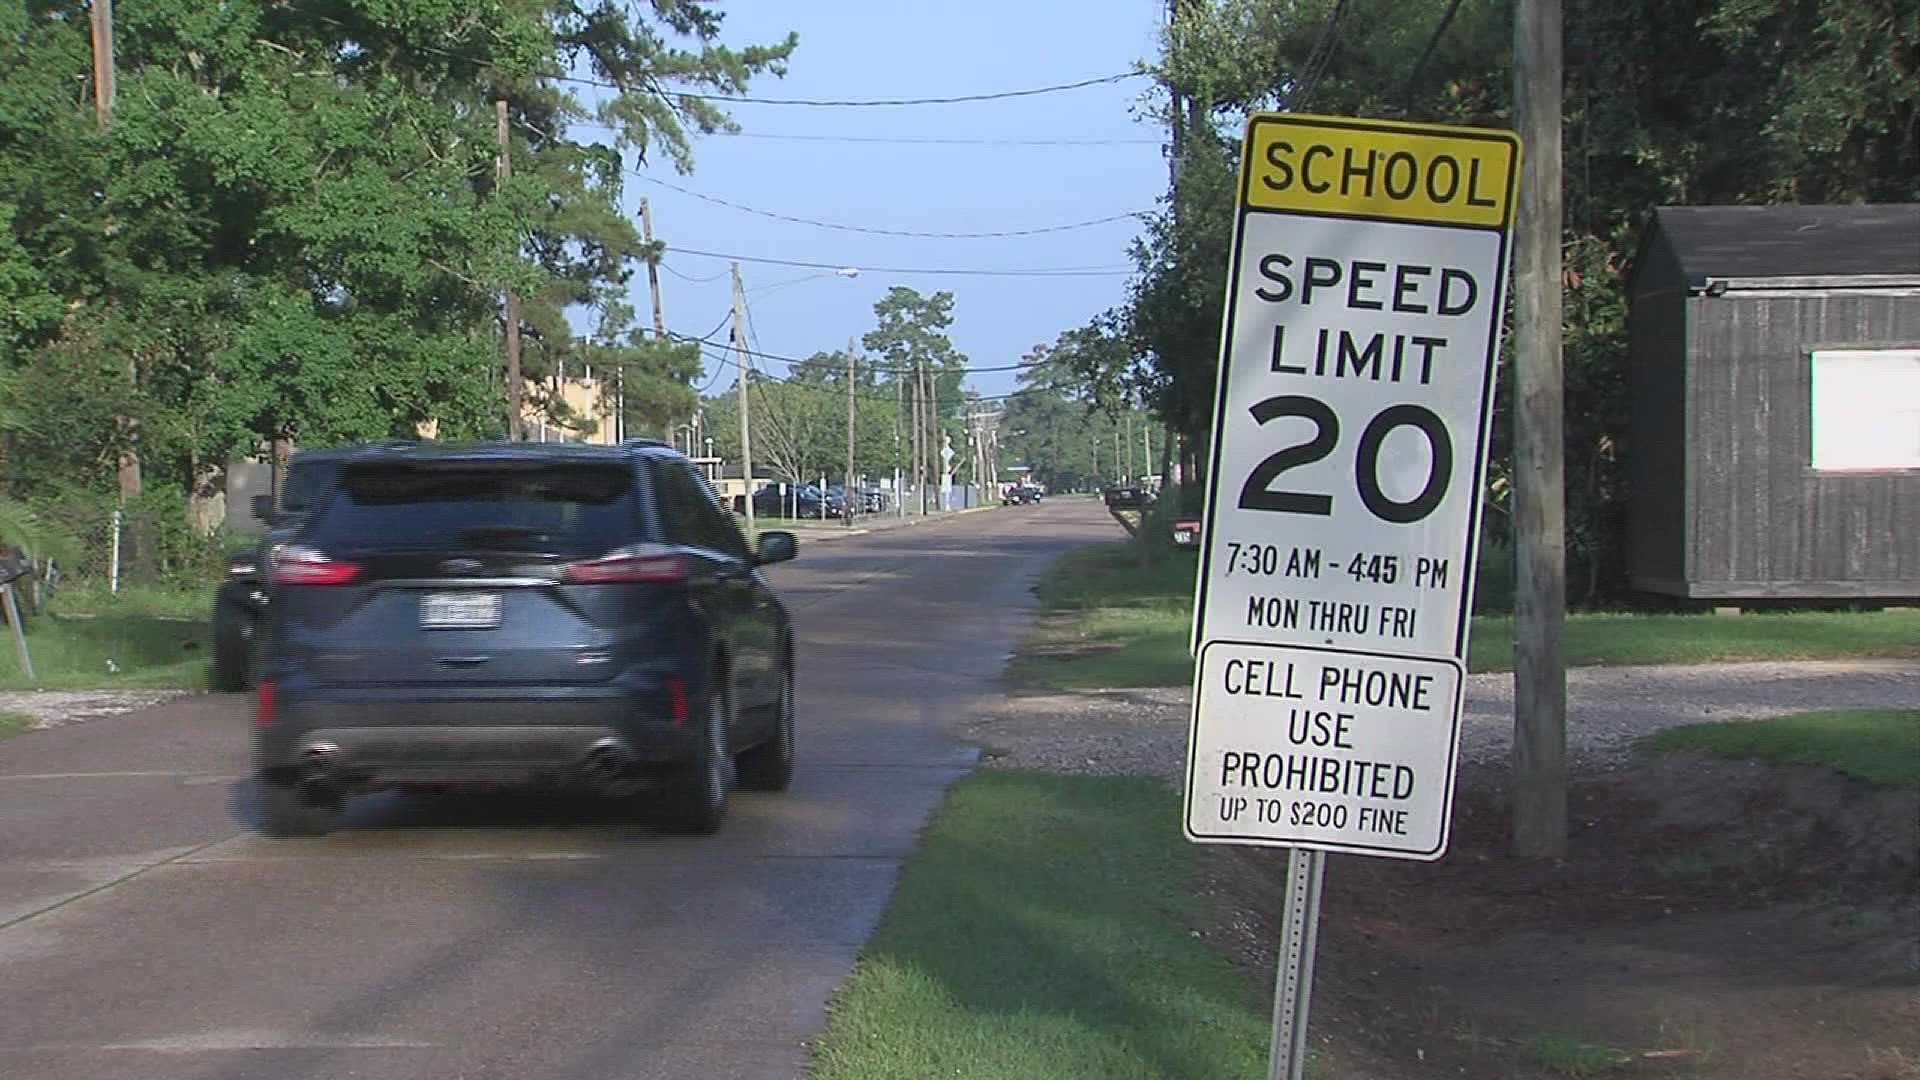 As the new school year starts this week it's time for drivers to pay attention to school zone safety.